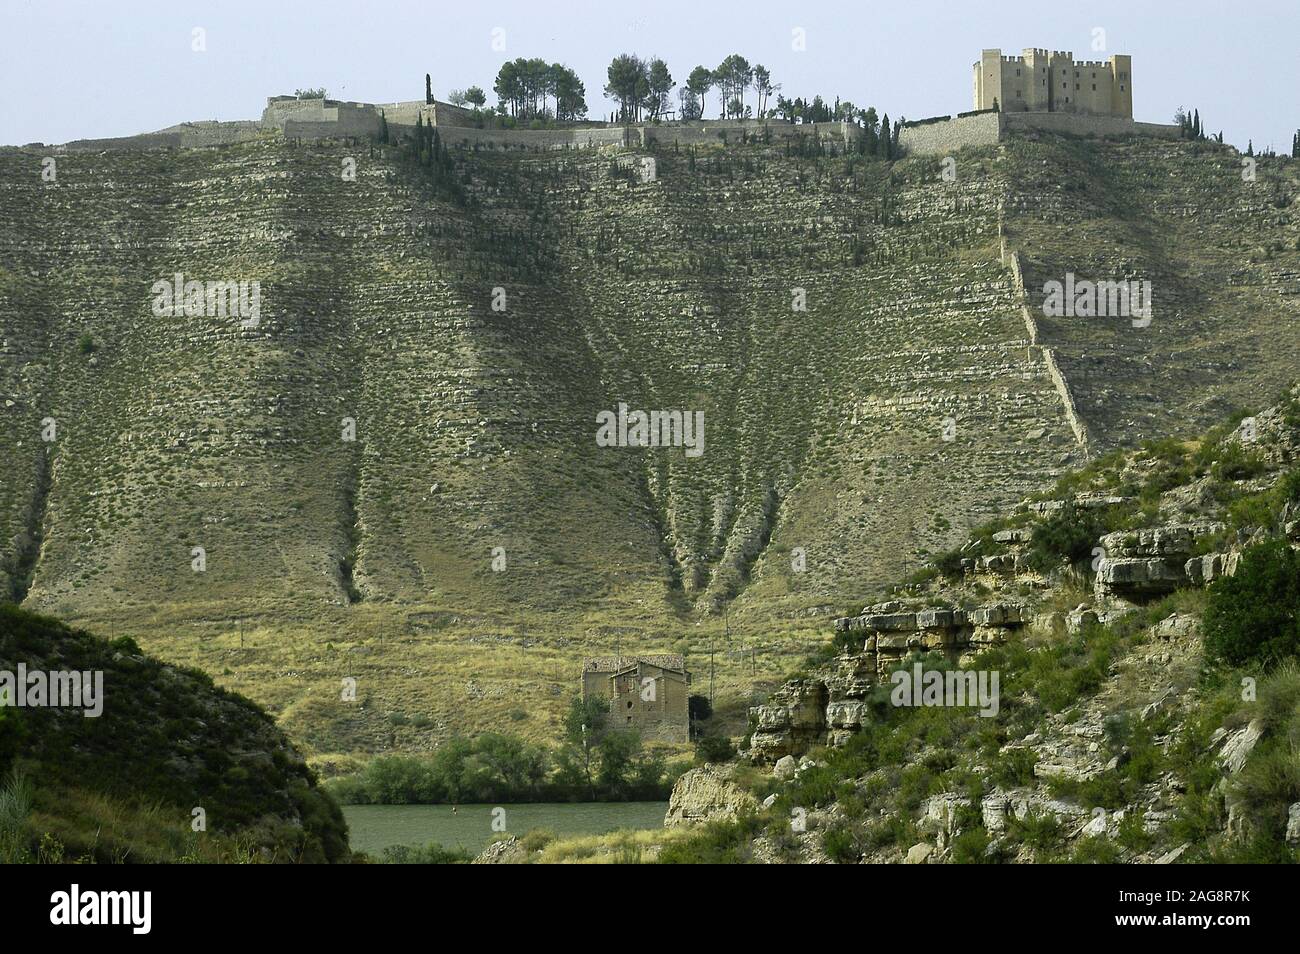 MEQUINENZA, SPAIN - Sep 05, 2004: A low angle shot of the Castle of Mequinenza in Mequinenza, Spain Stock Photo